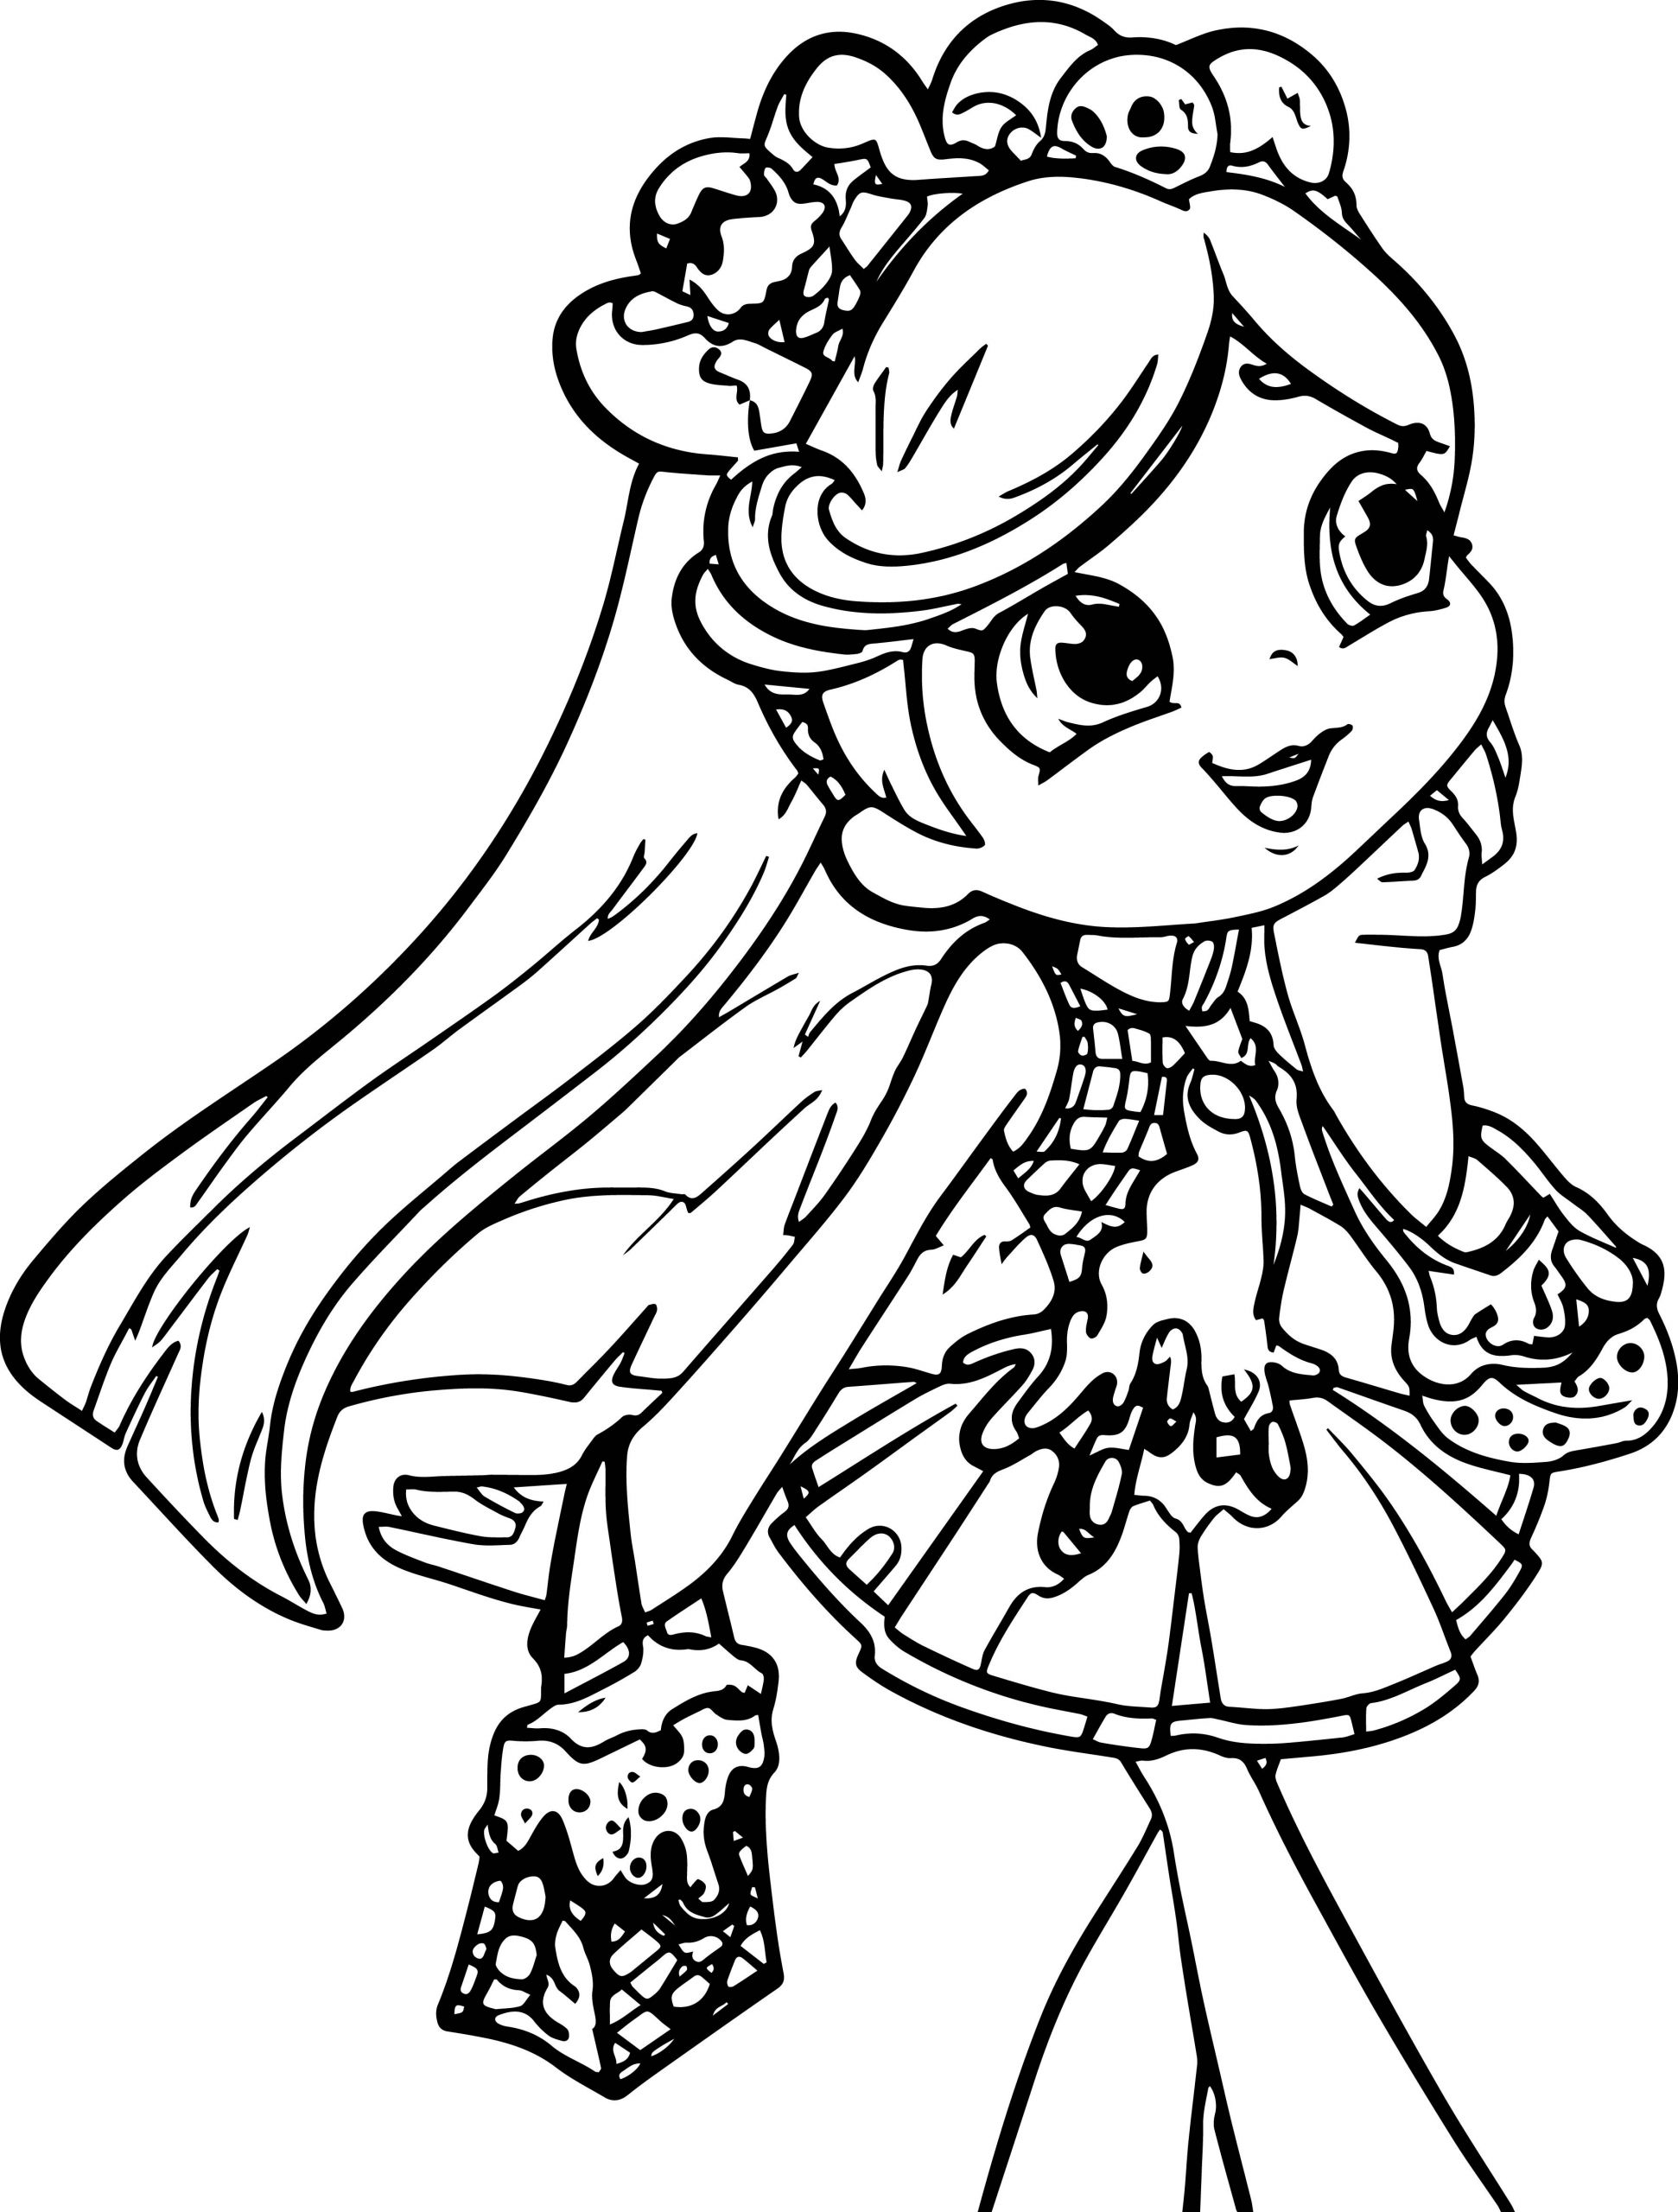 Coloring Pages For Girls Shopkins
 Shopkins Dolls Coloring Pages at GetColorings